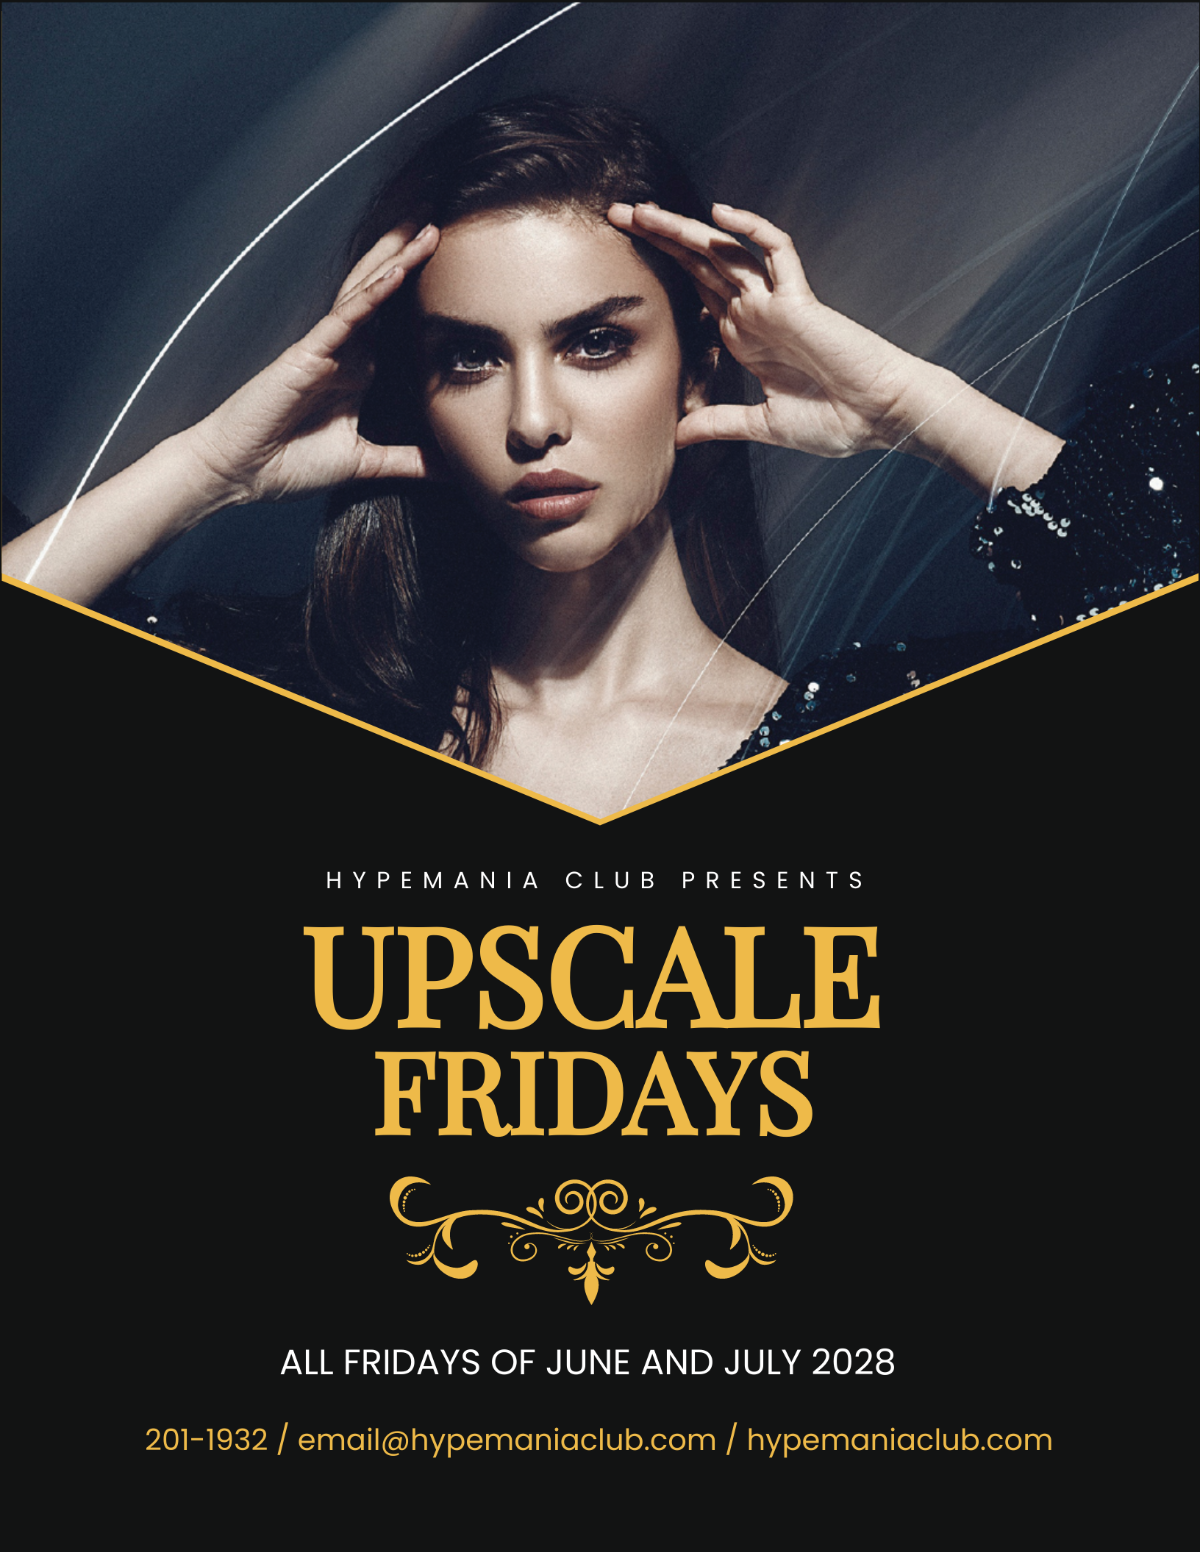 Upscale Fridays Flyer Template